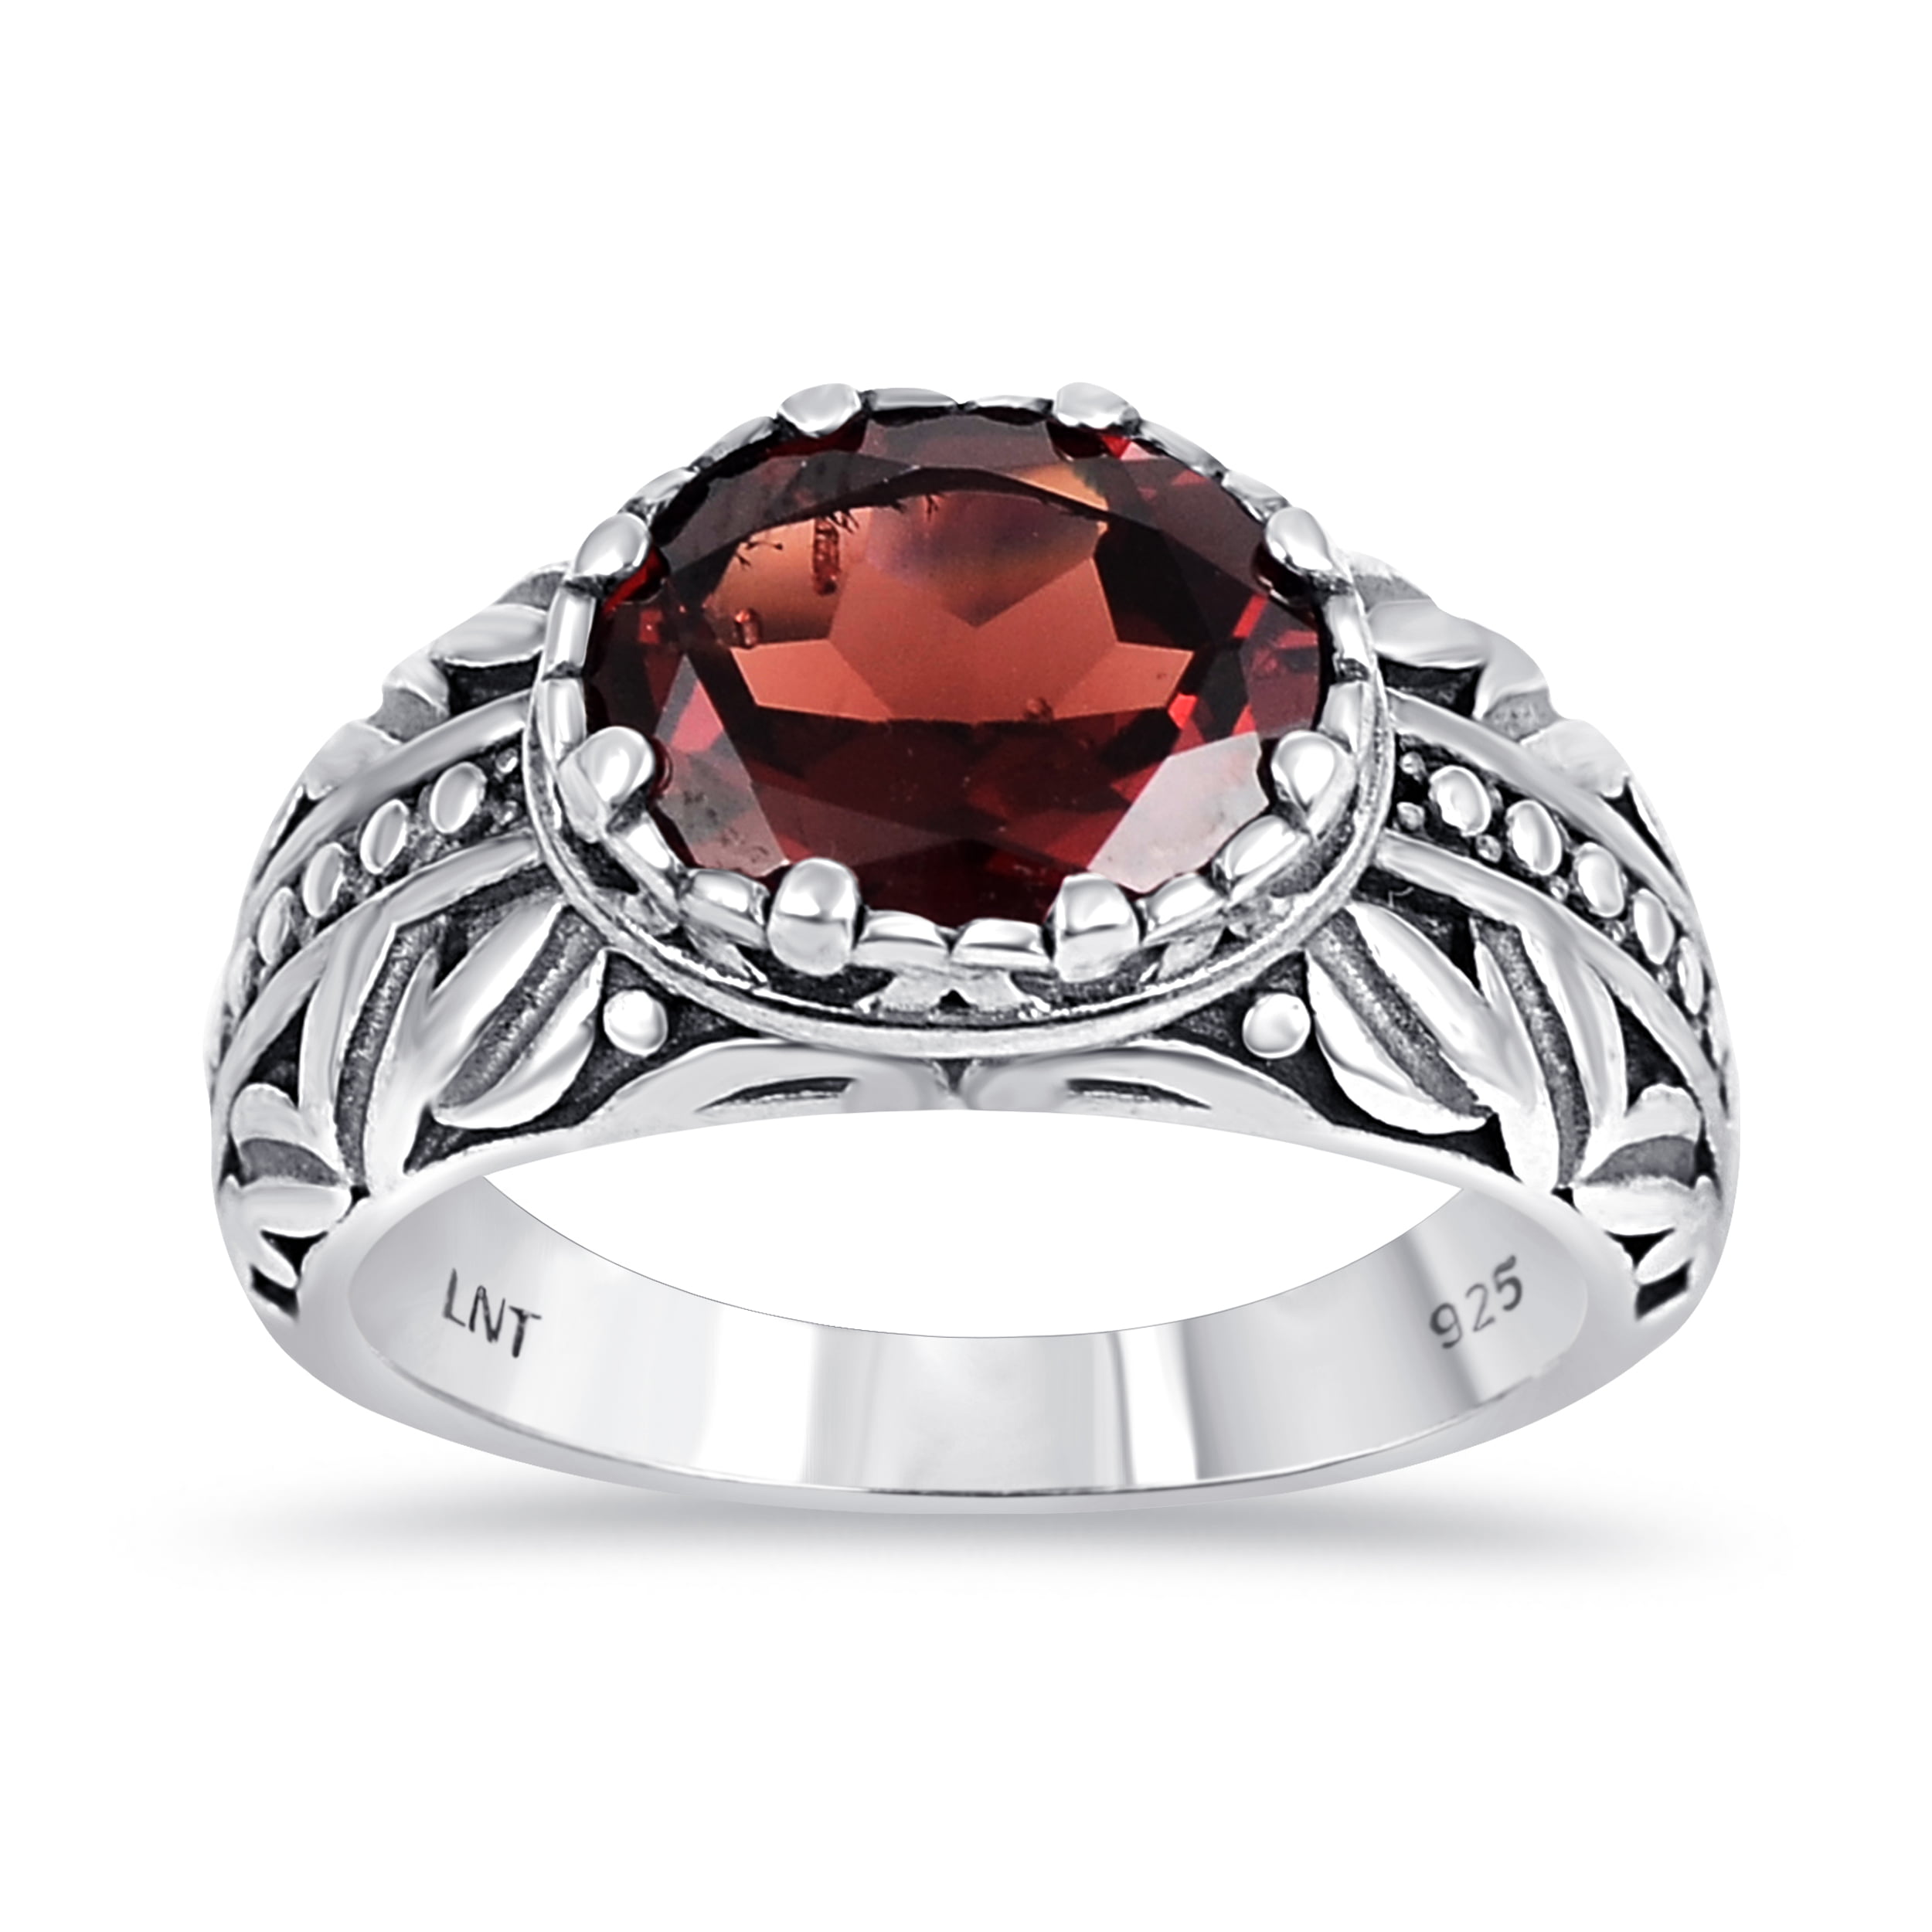 5-Stone Natural Garnet White Gold Plated 925 Sterling Silver Ring 2.94ct 